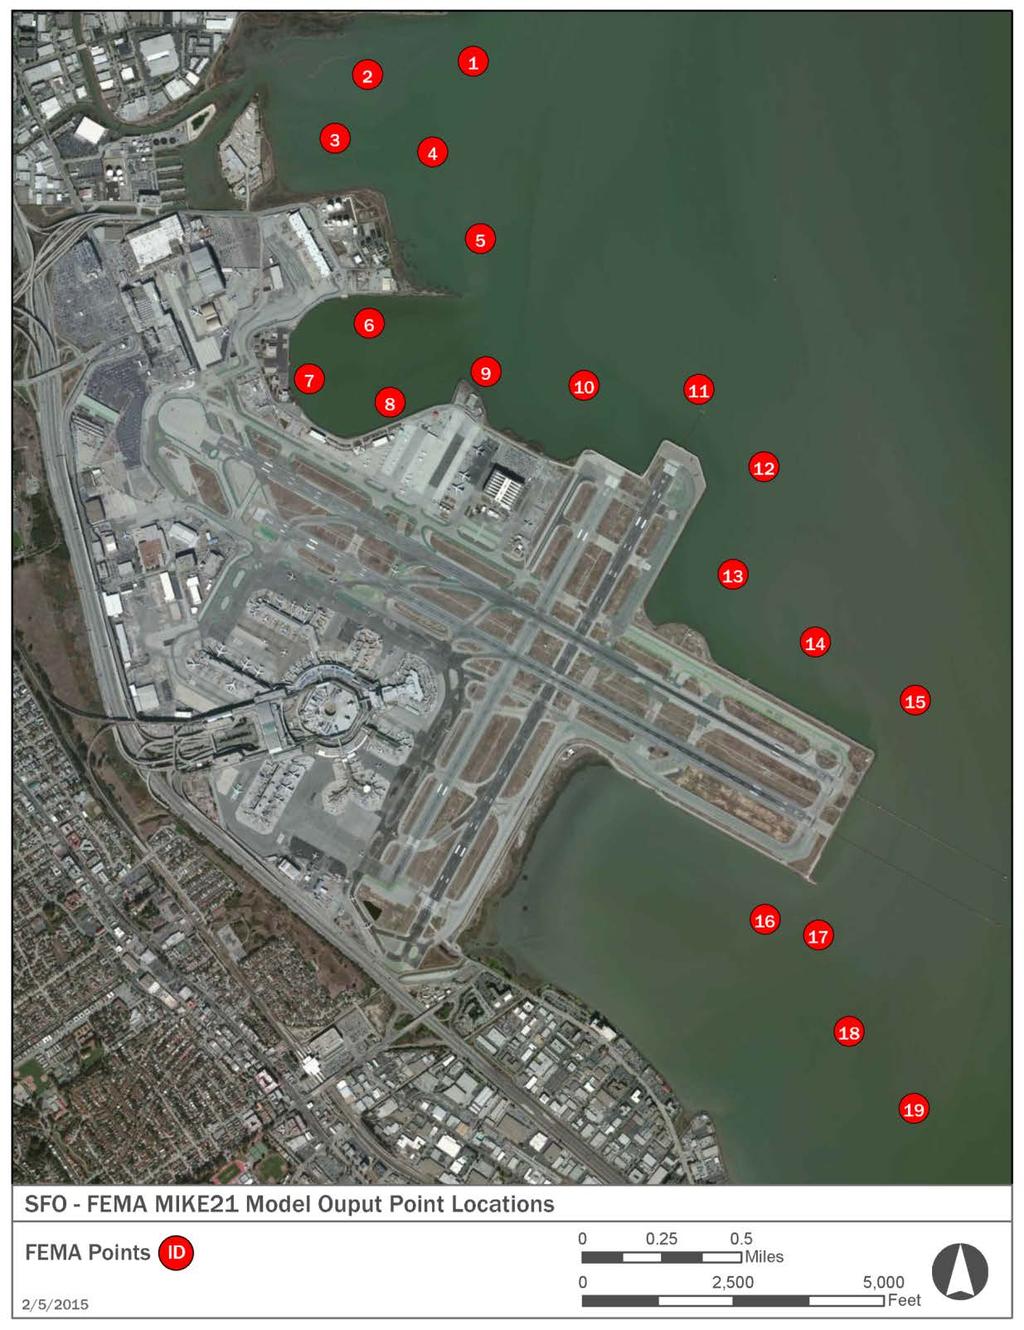 San Francisco International Airport Daily and Extreme Tide Elevations This section provides the existing tidal elevations at specific points along the Bay shoreline of the San Francisco International